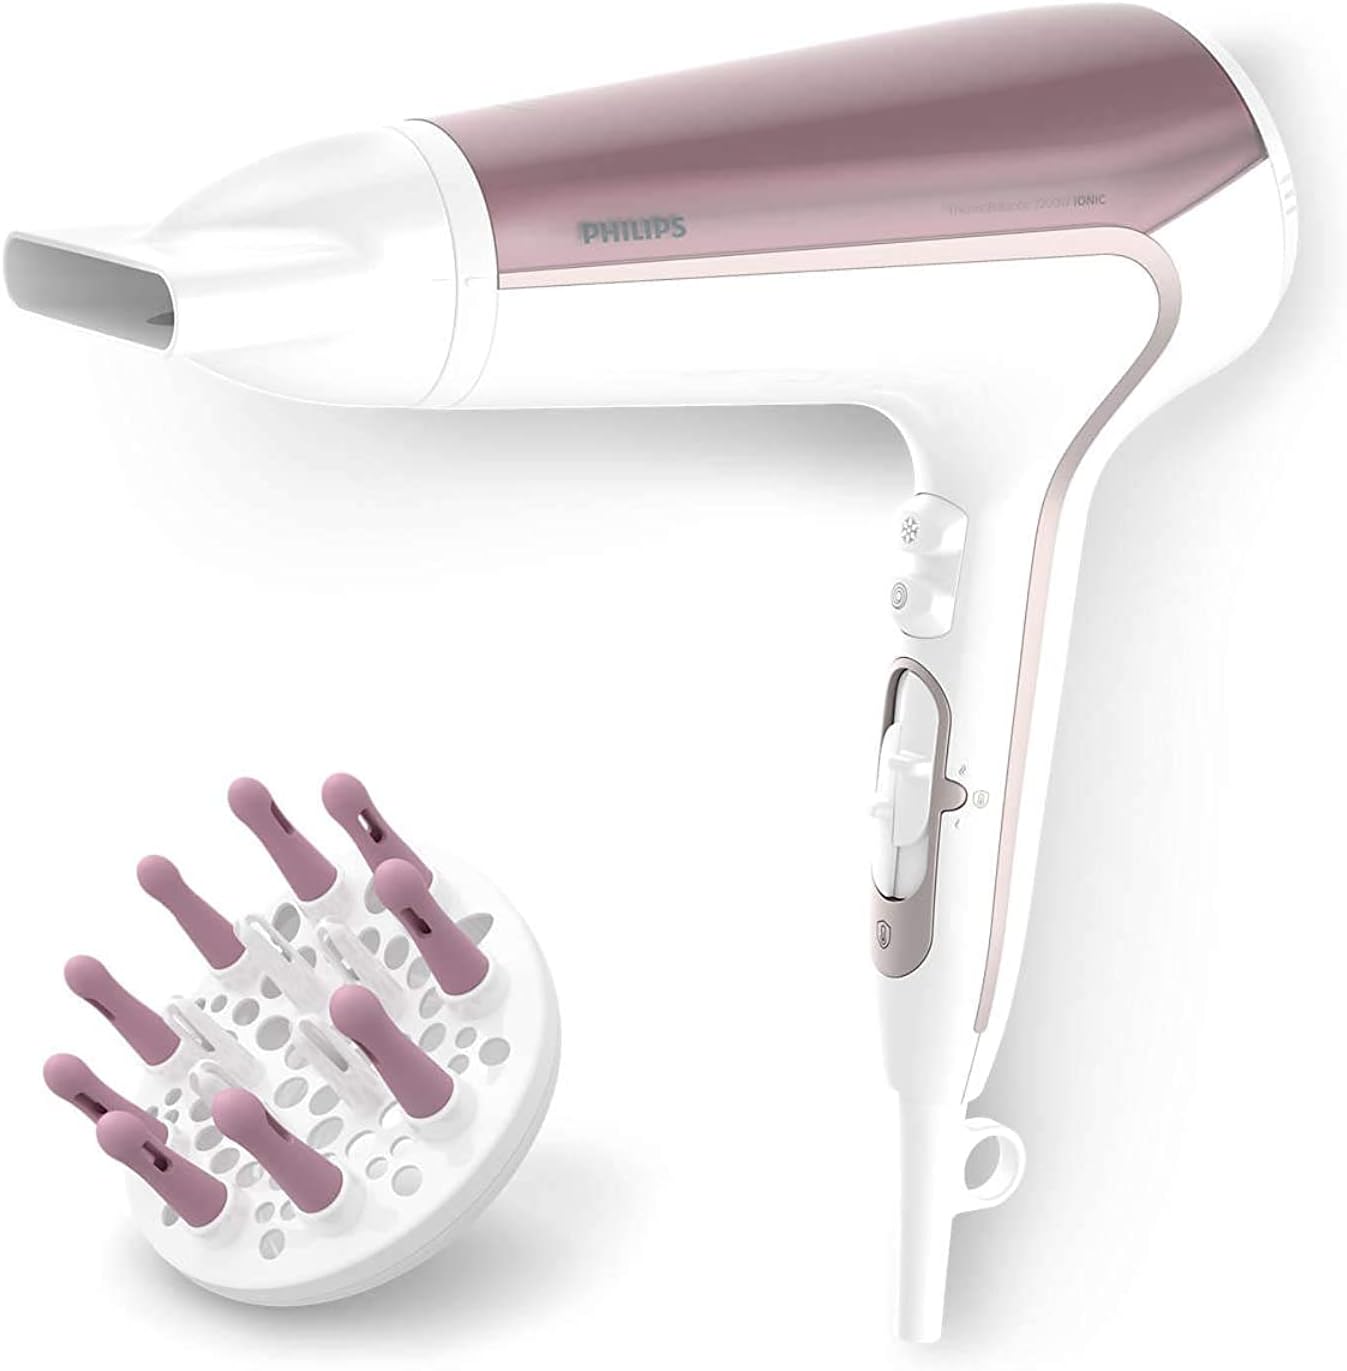 Philips DryCare Advanced Hair Dryer | Power 2200W | Color White | Best Personal Care Accessories in Bahrain | Halabh